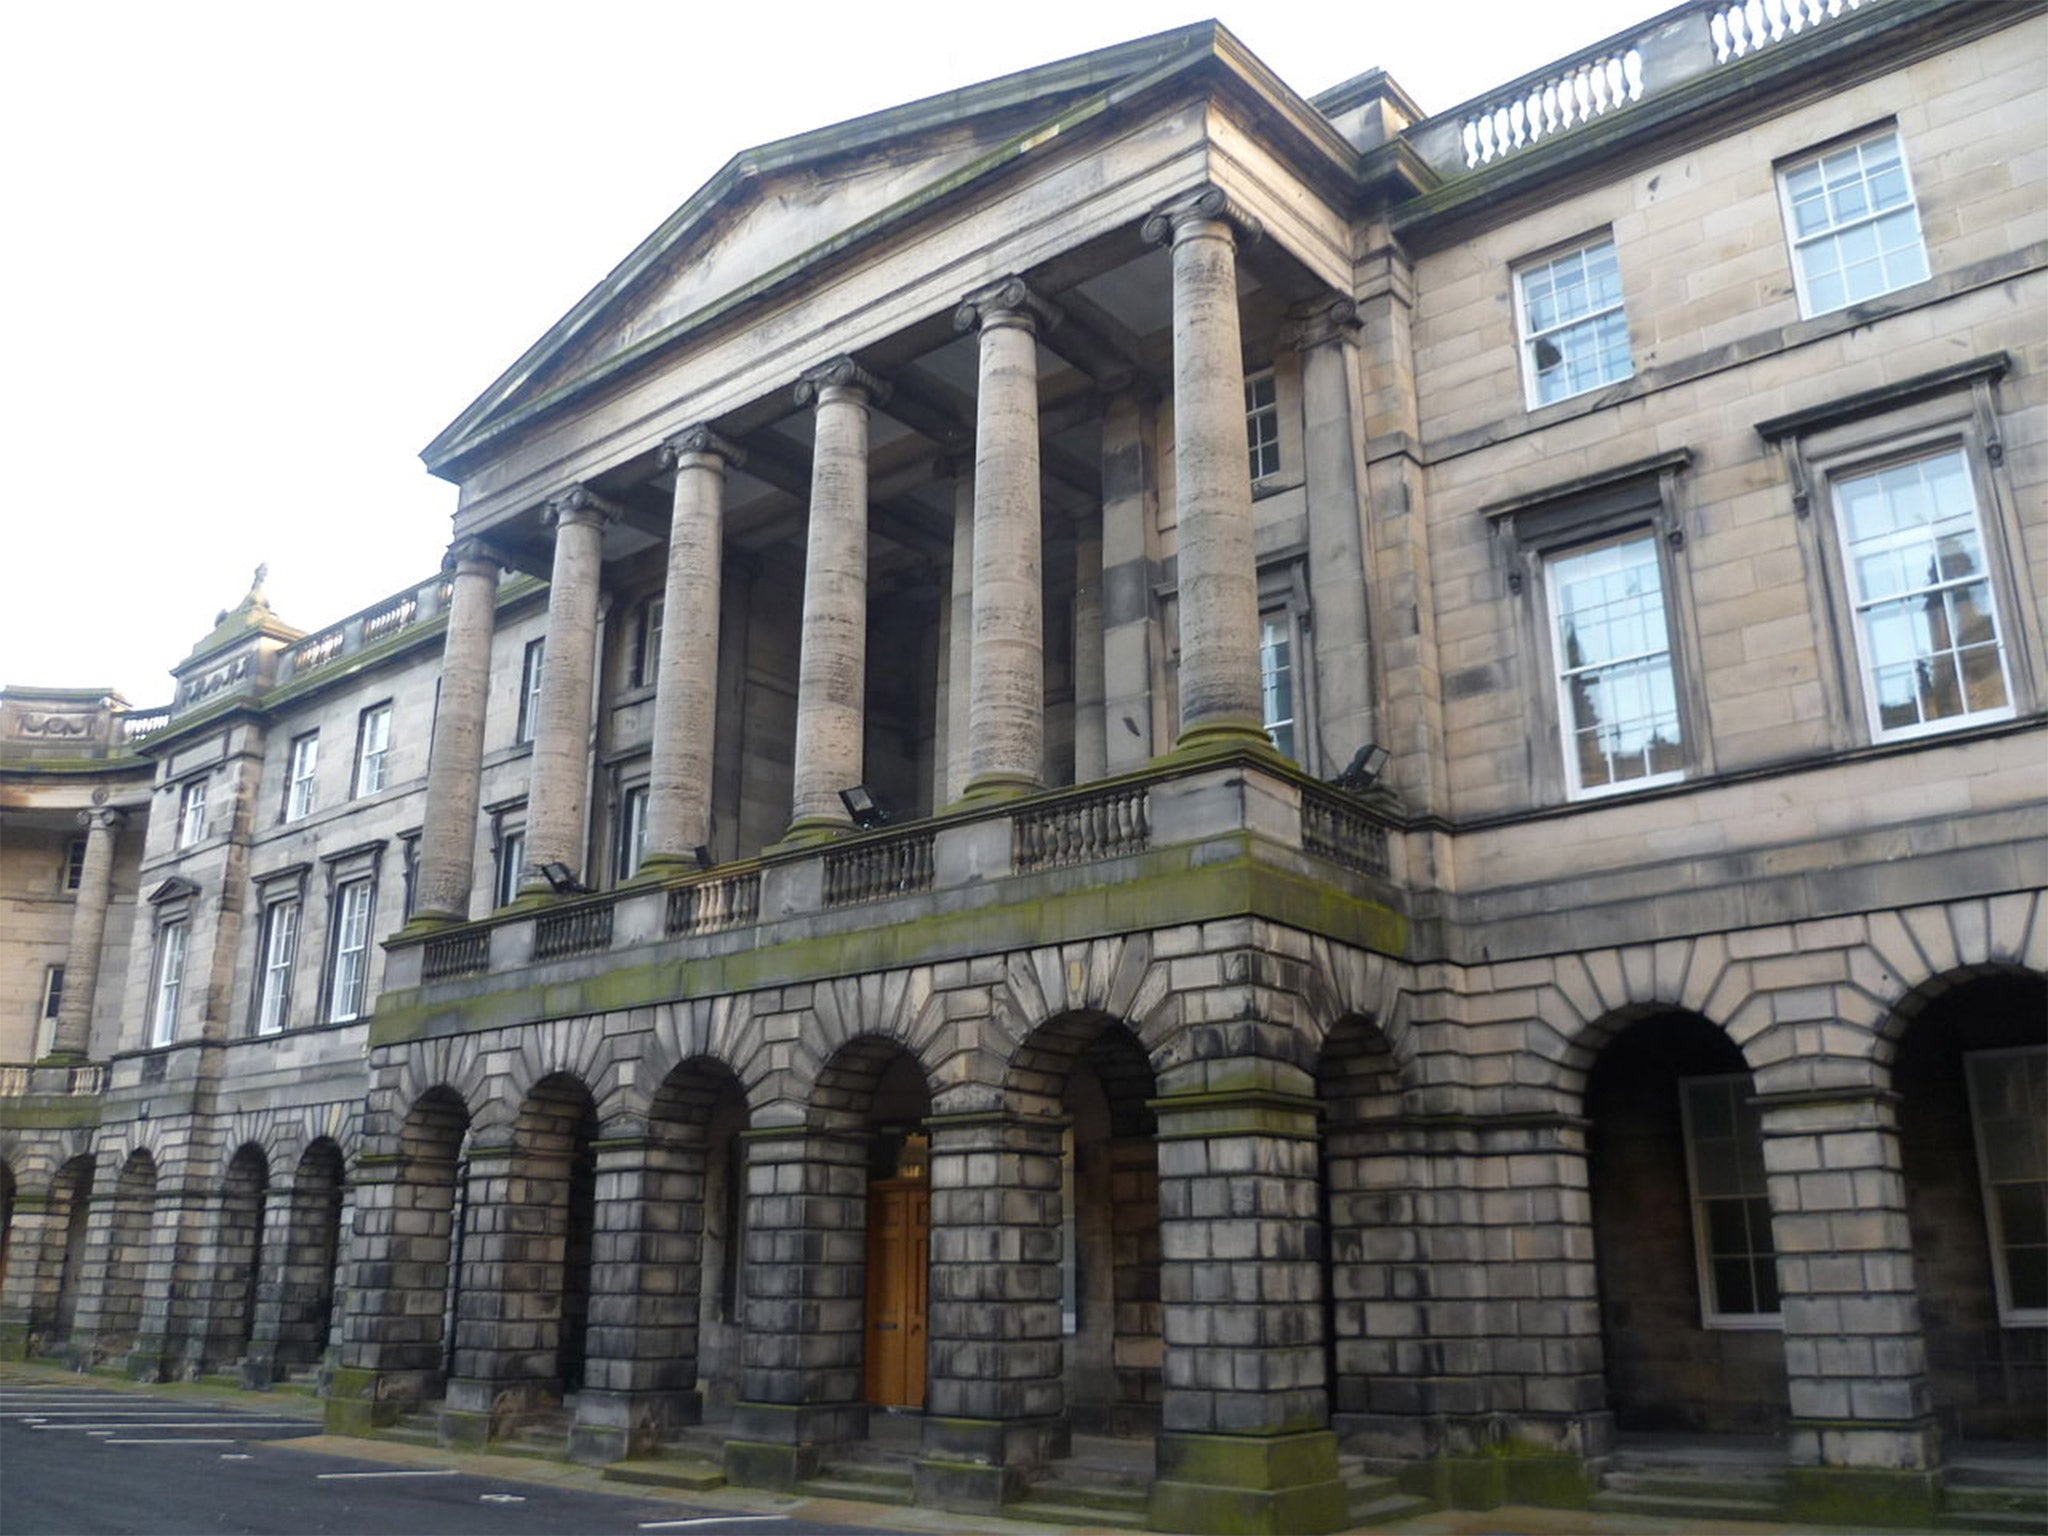 Parliament House, the home of the Supreme Courts of Scotland, in Edinburgh